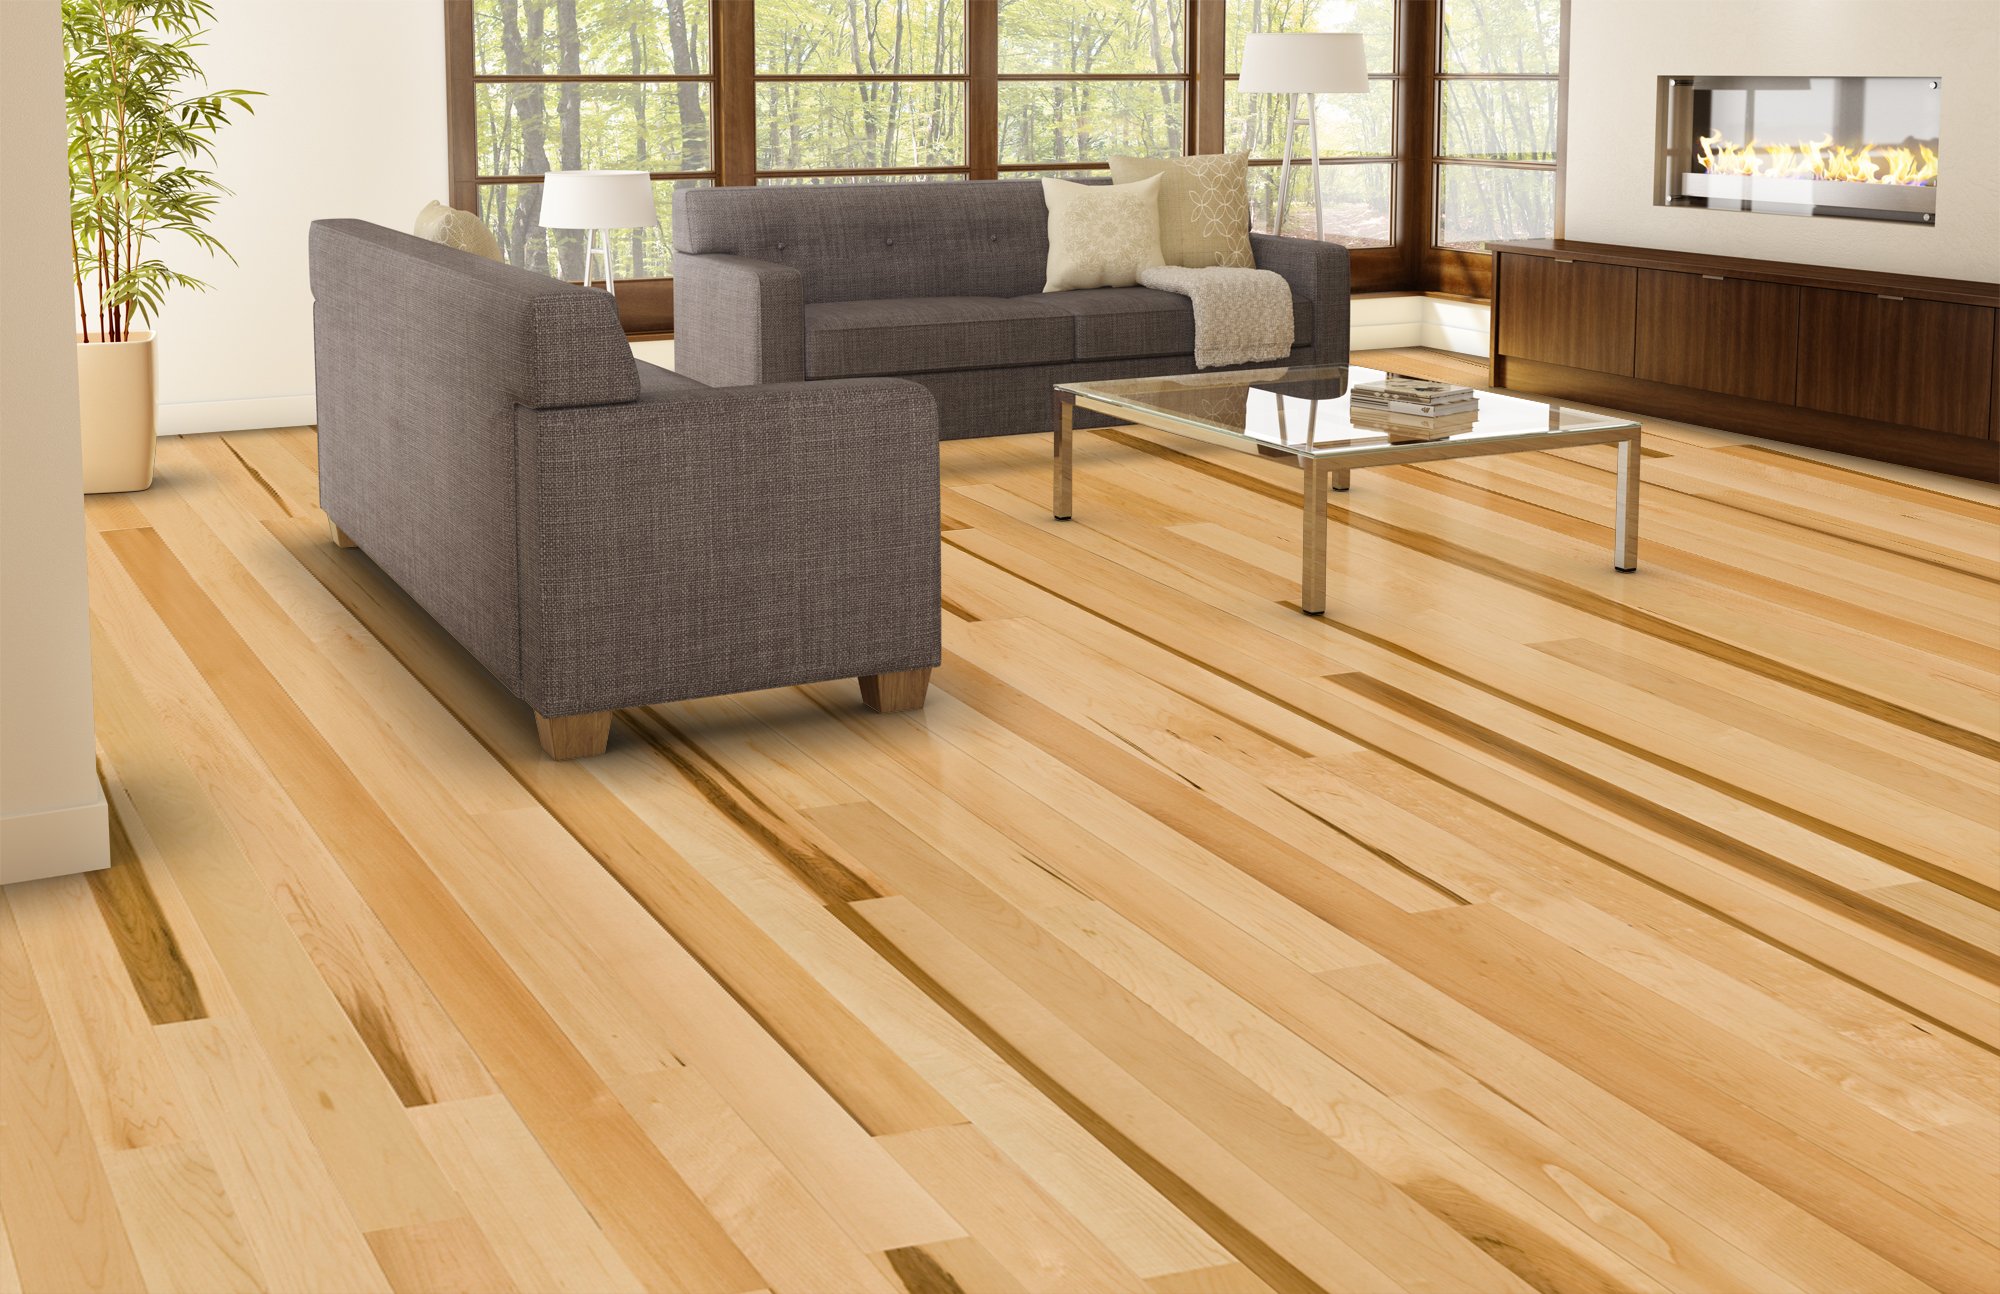 Creative Ways to Incorporate Timber Flooring into Your Home Décor